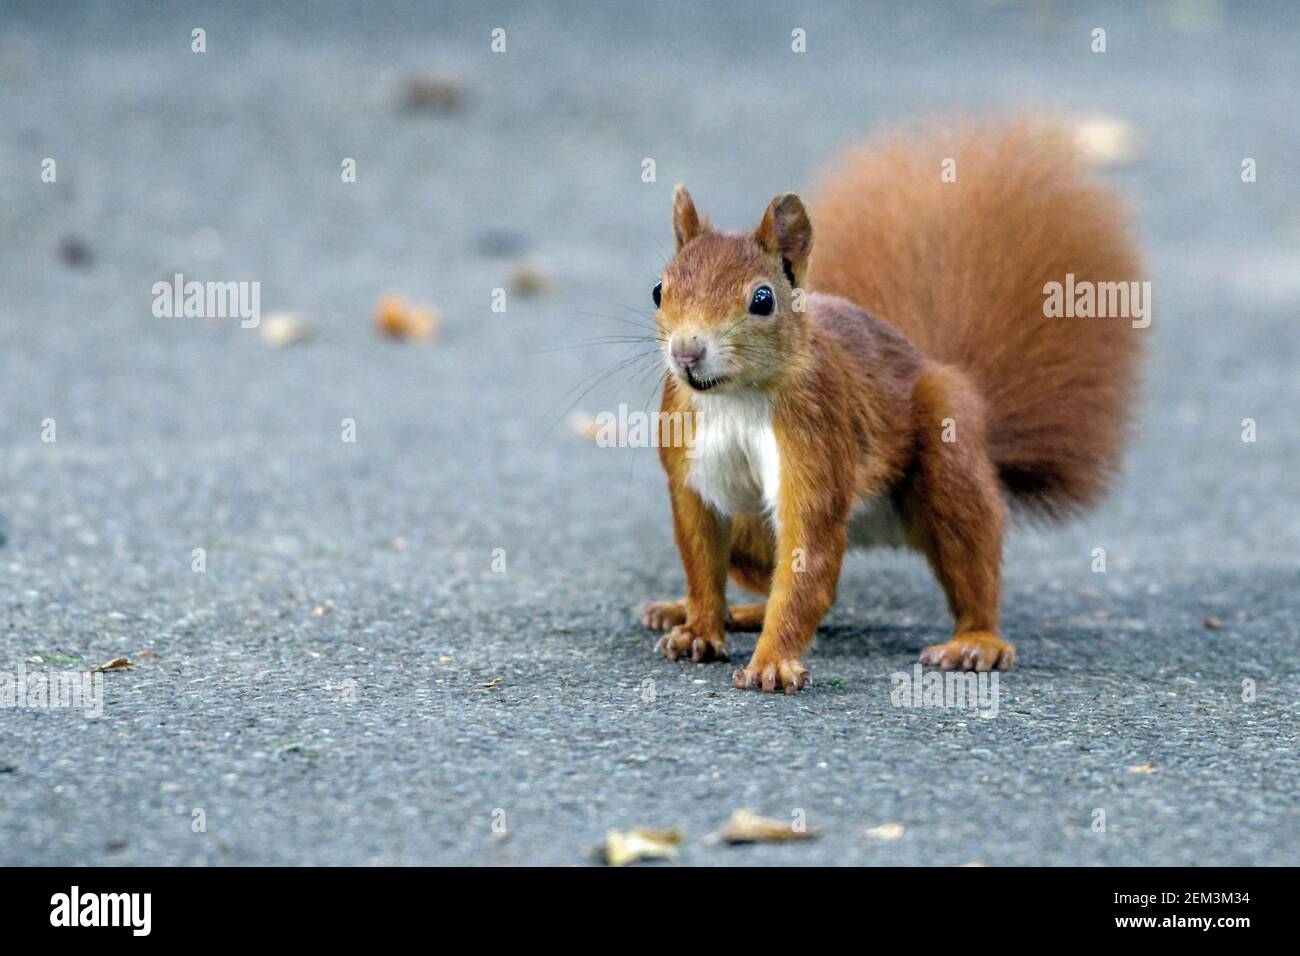 European red squirrel, Eurasian red squirrel (Sciurus vulgaris), red morph on an asphalt surface, front view , Germany, Baden-Wuerttemberg Stock Photo